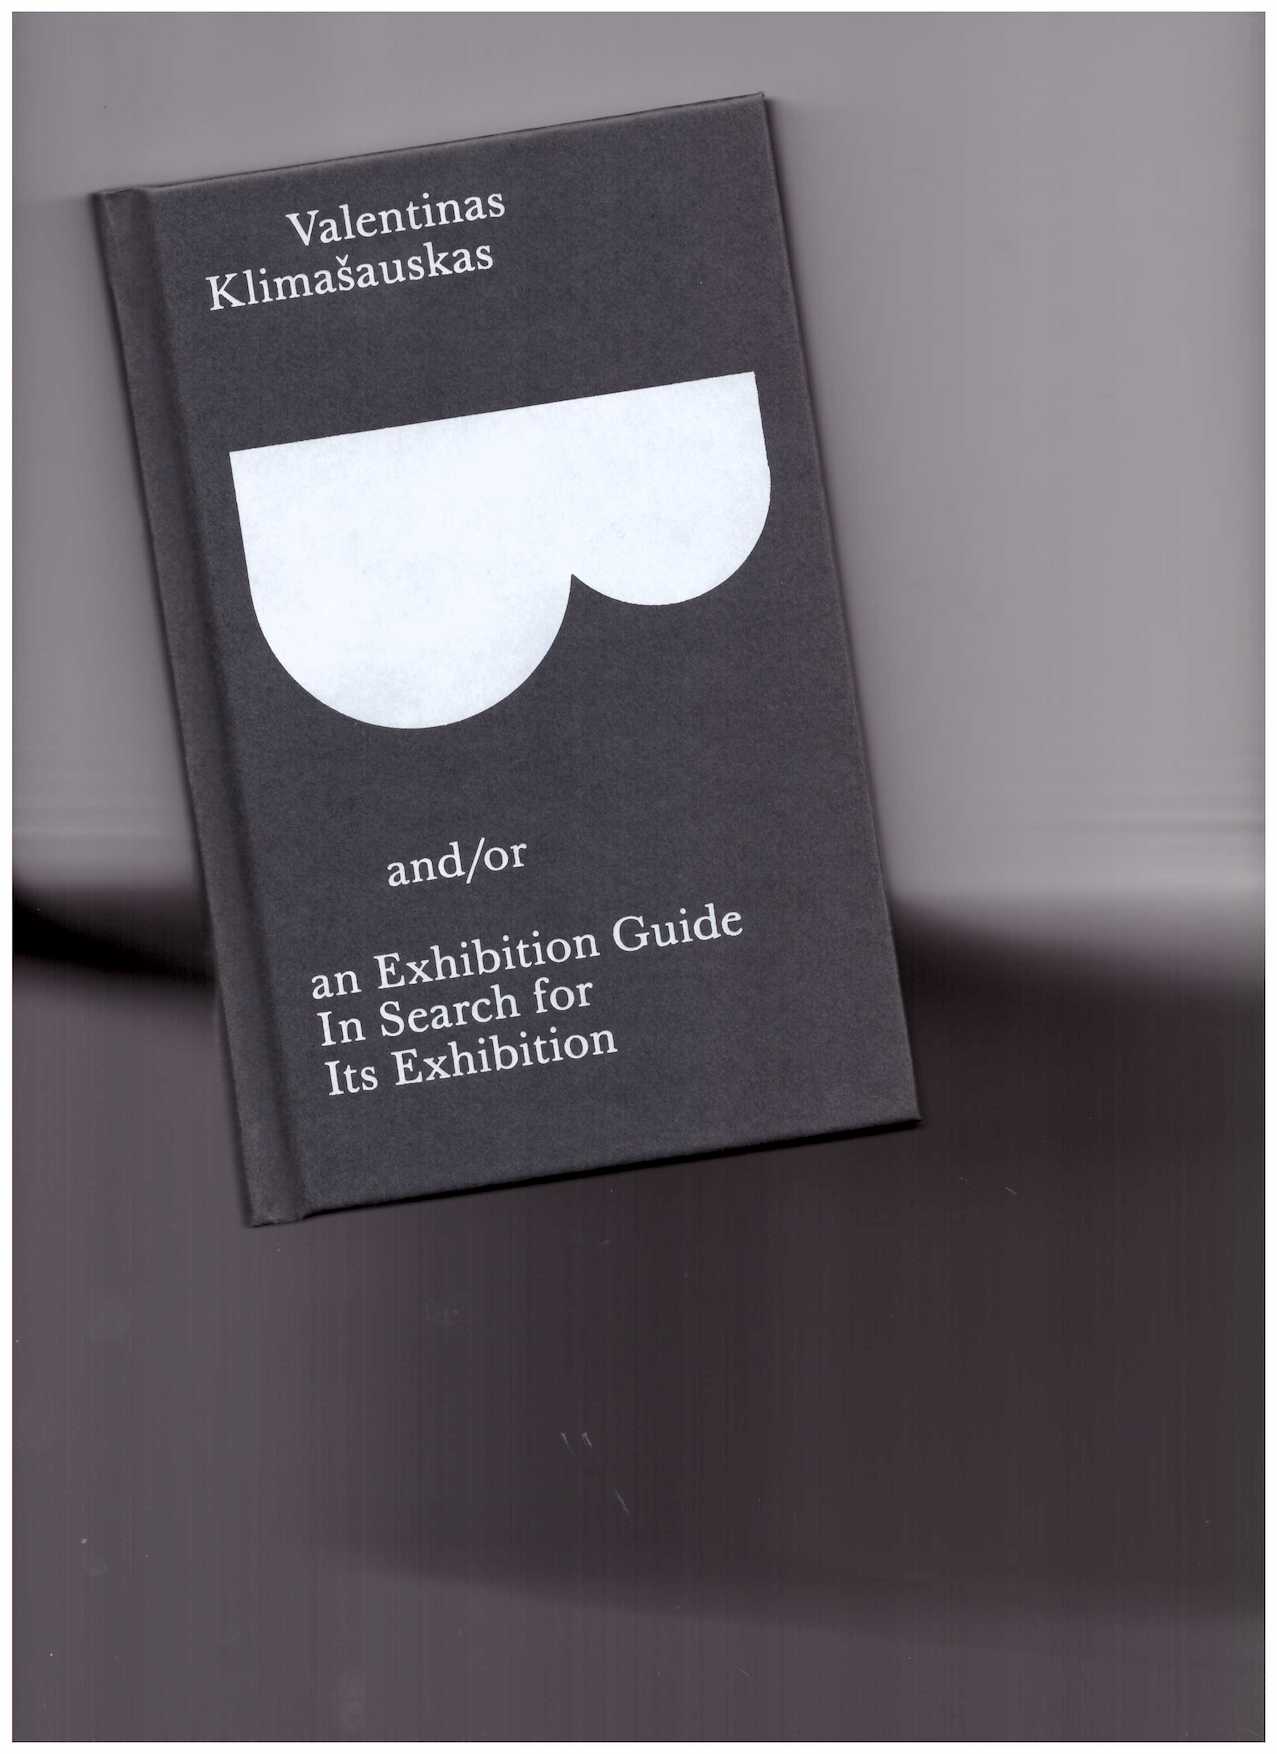 KLIMAŠAUSKAS, Valentinas - B and/or an Exhibition guide in search of its exhibition